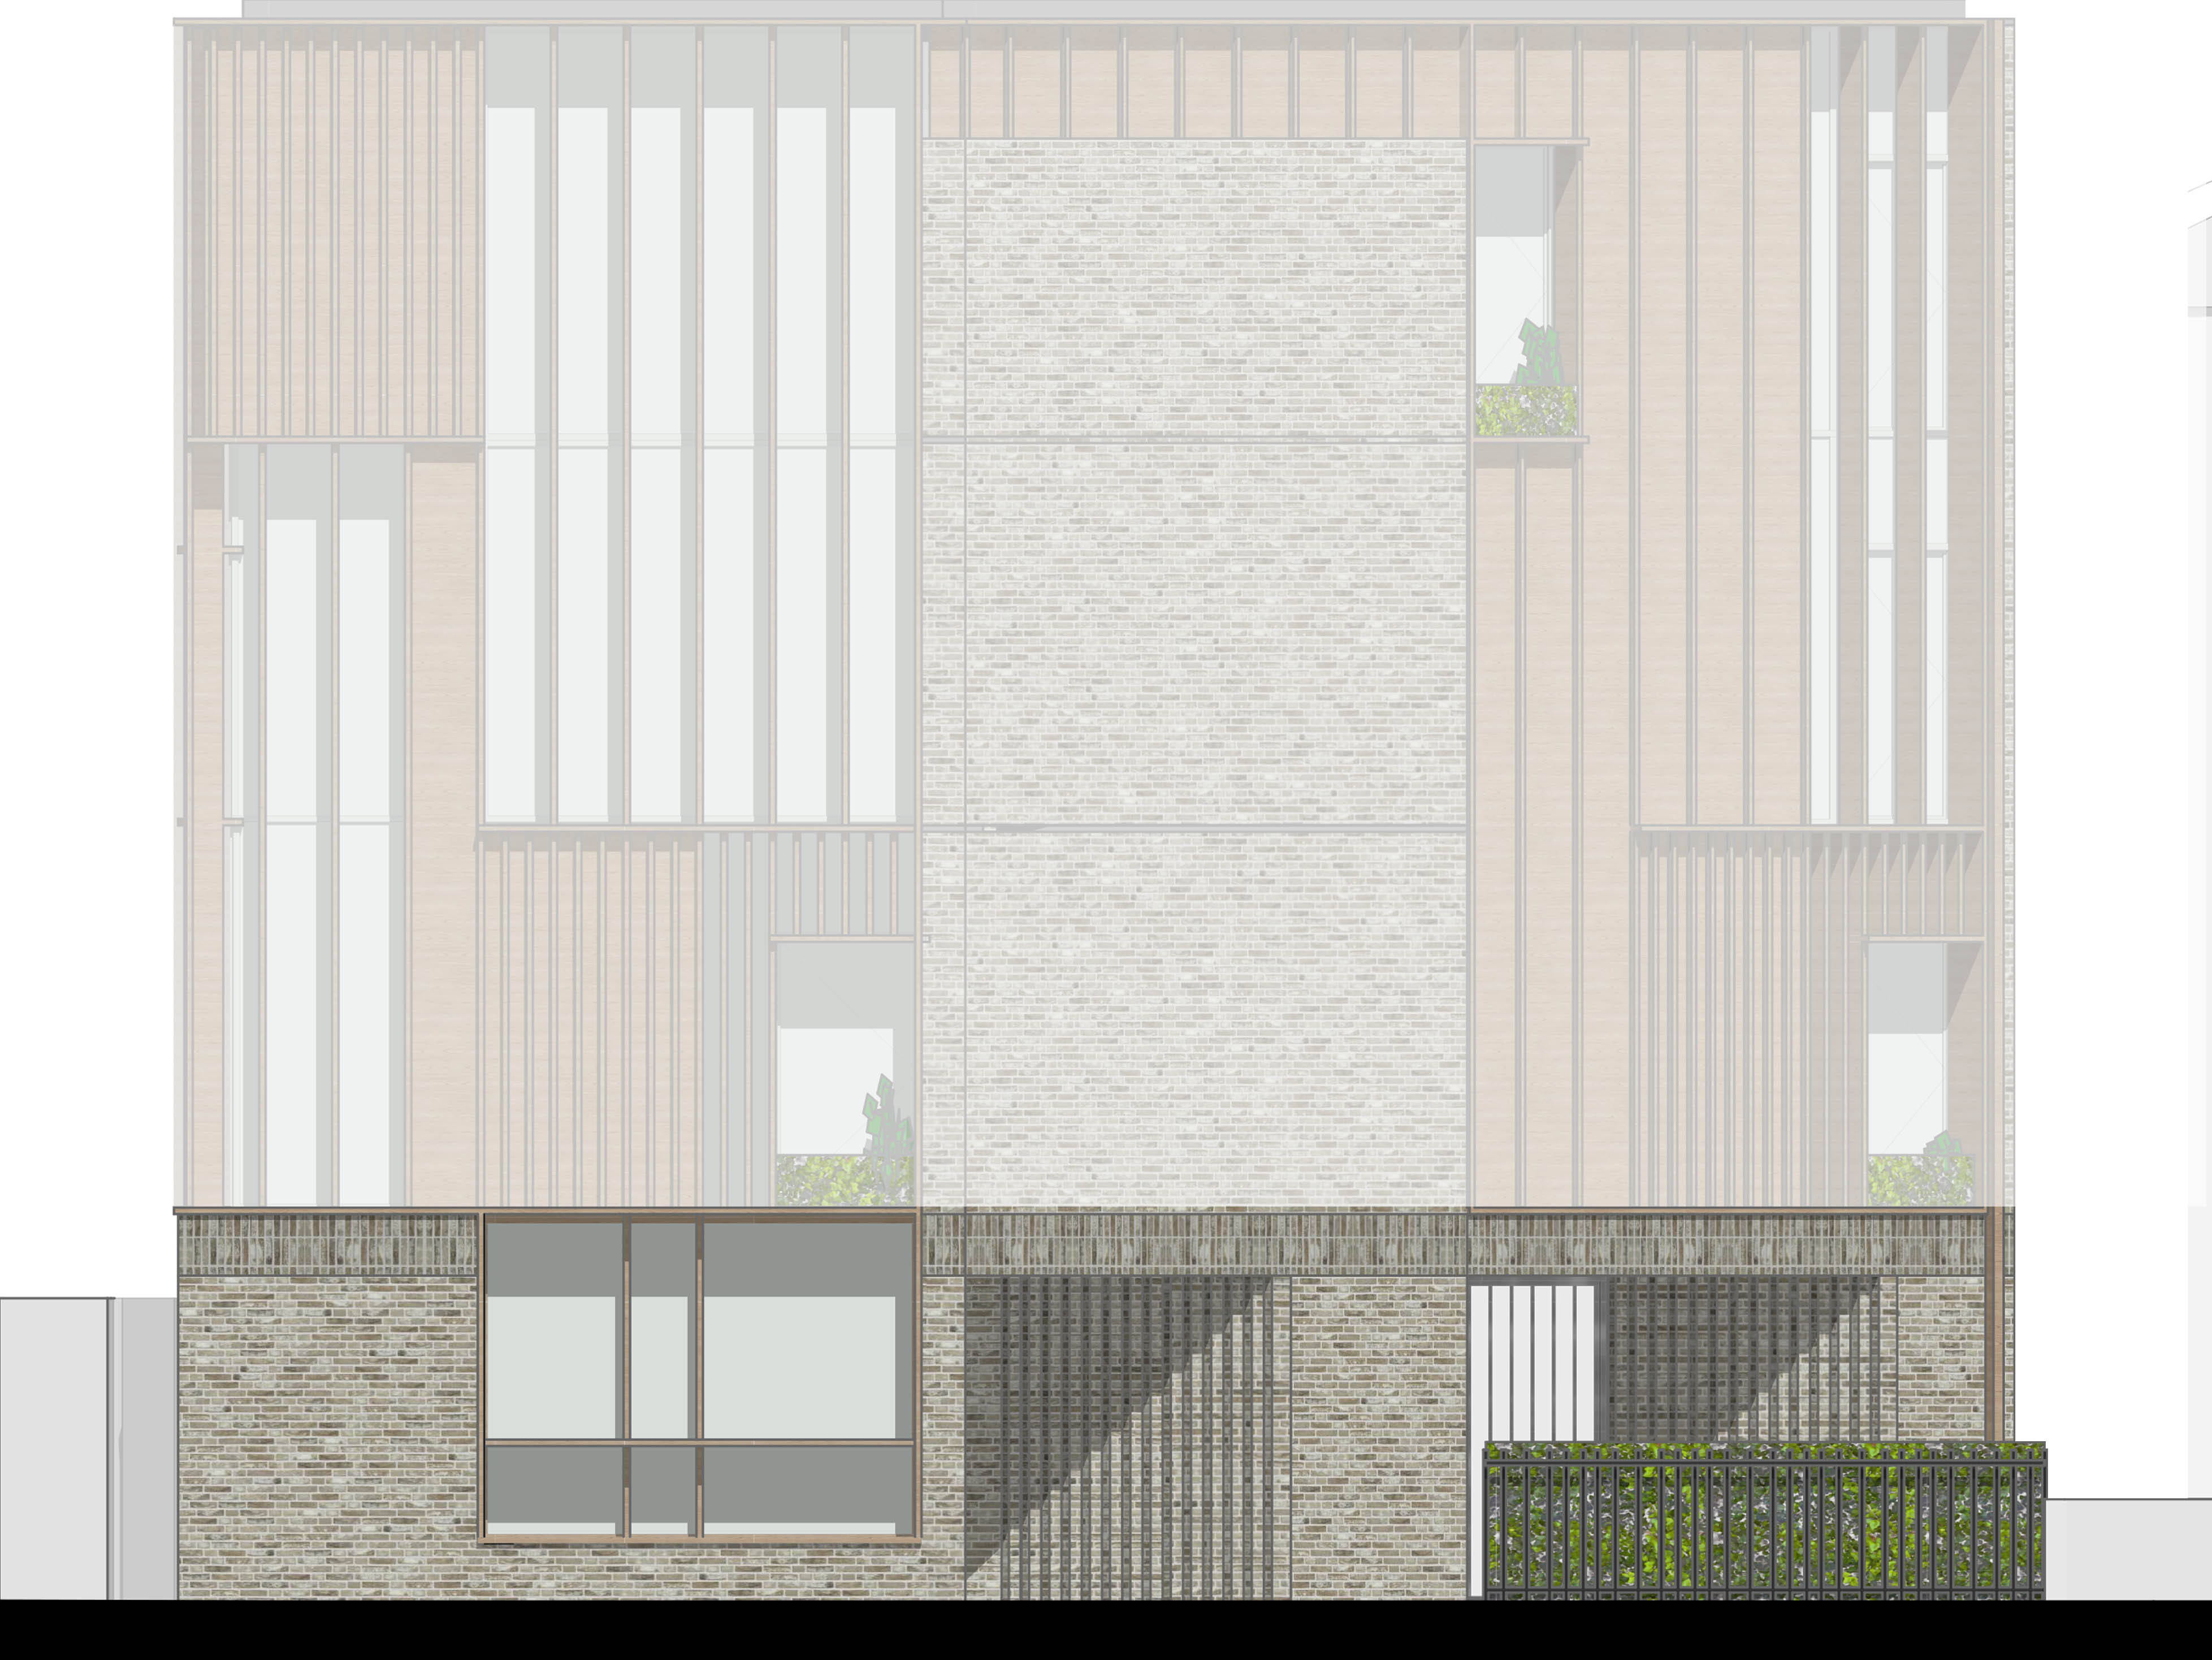 Elevation illustrating the solid ground floor plinth on newmarket road |  cambridge architects CDC Studio